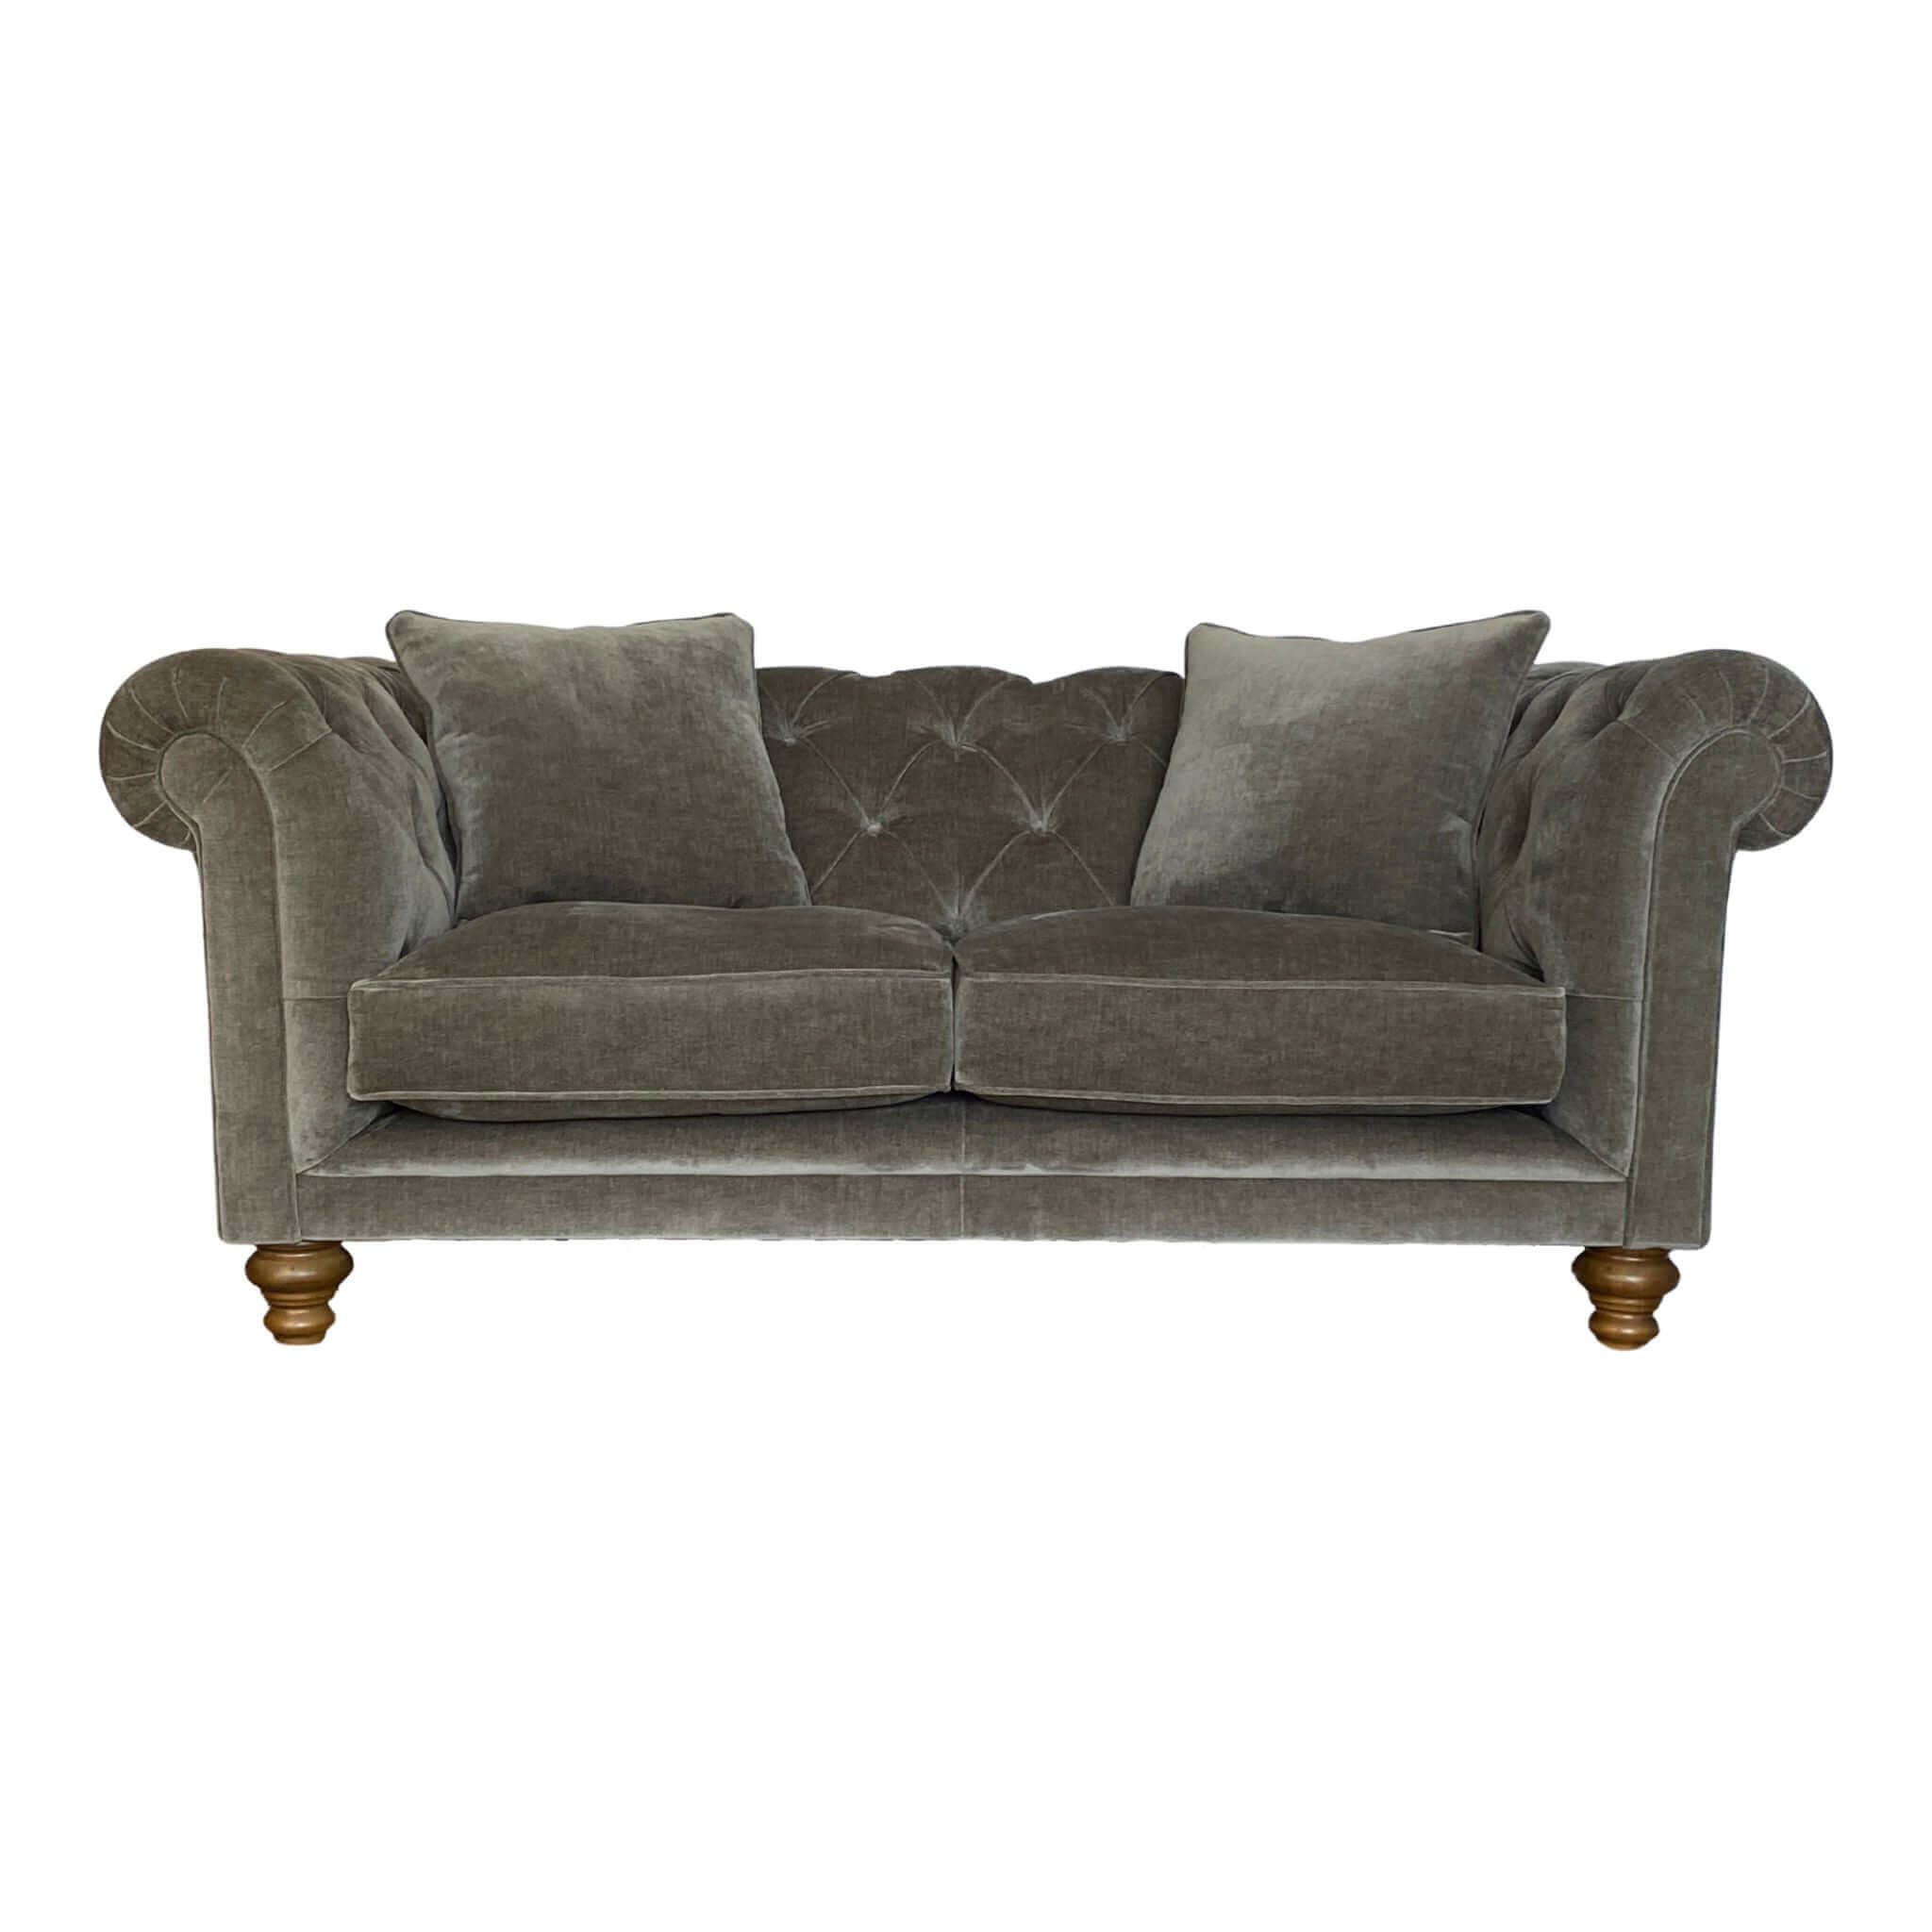 Edgecombe 3-Seat Chesterfield Sofa - escapologyhome.co.uk